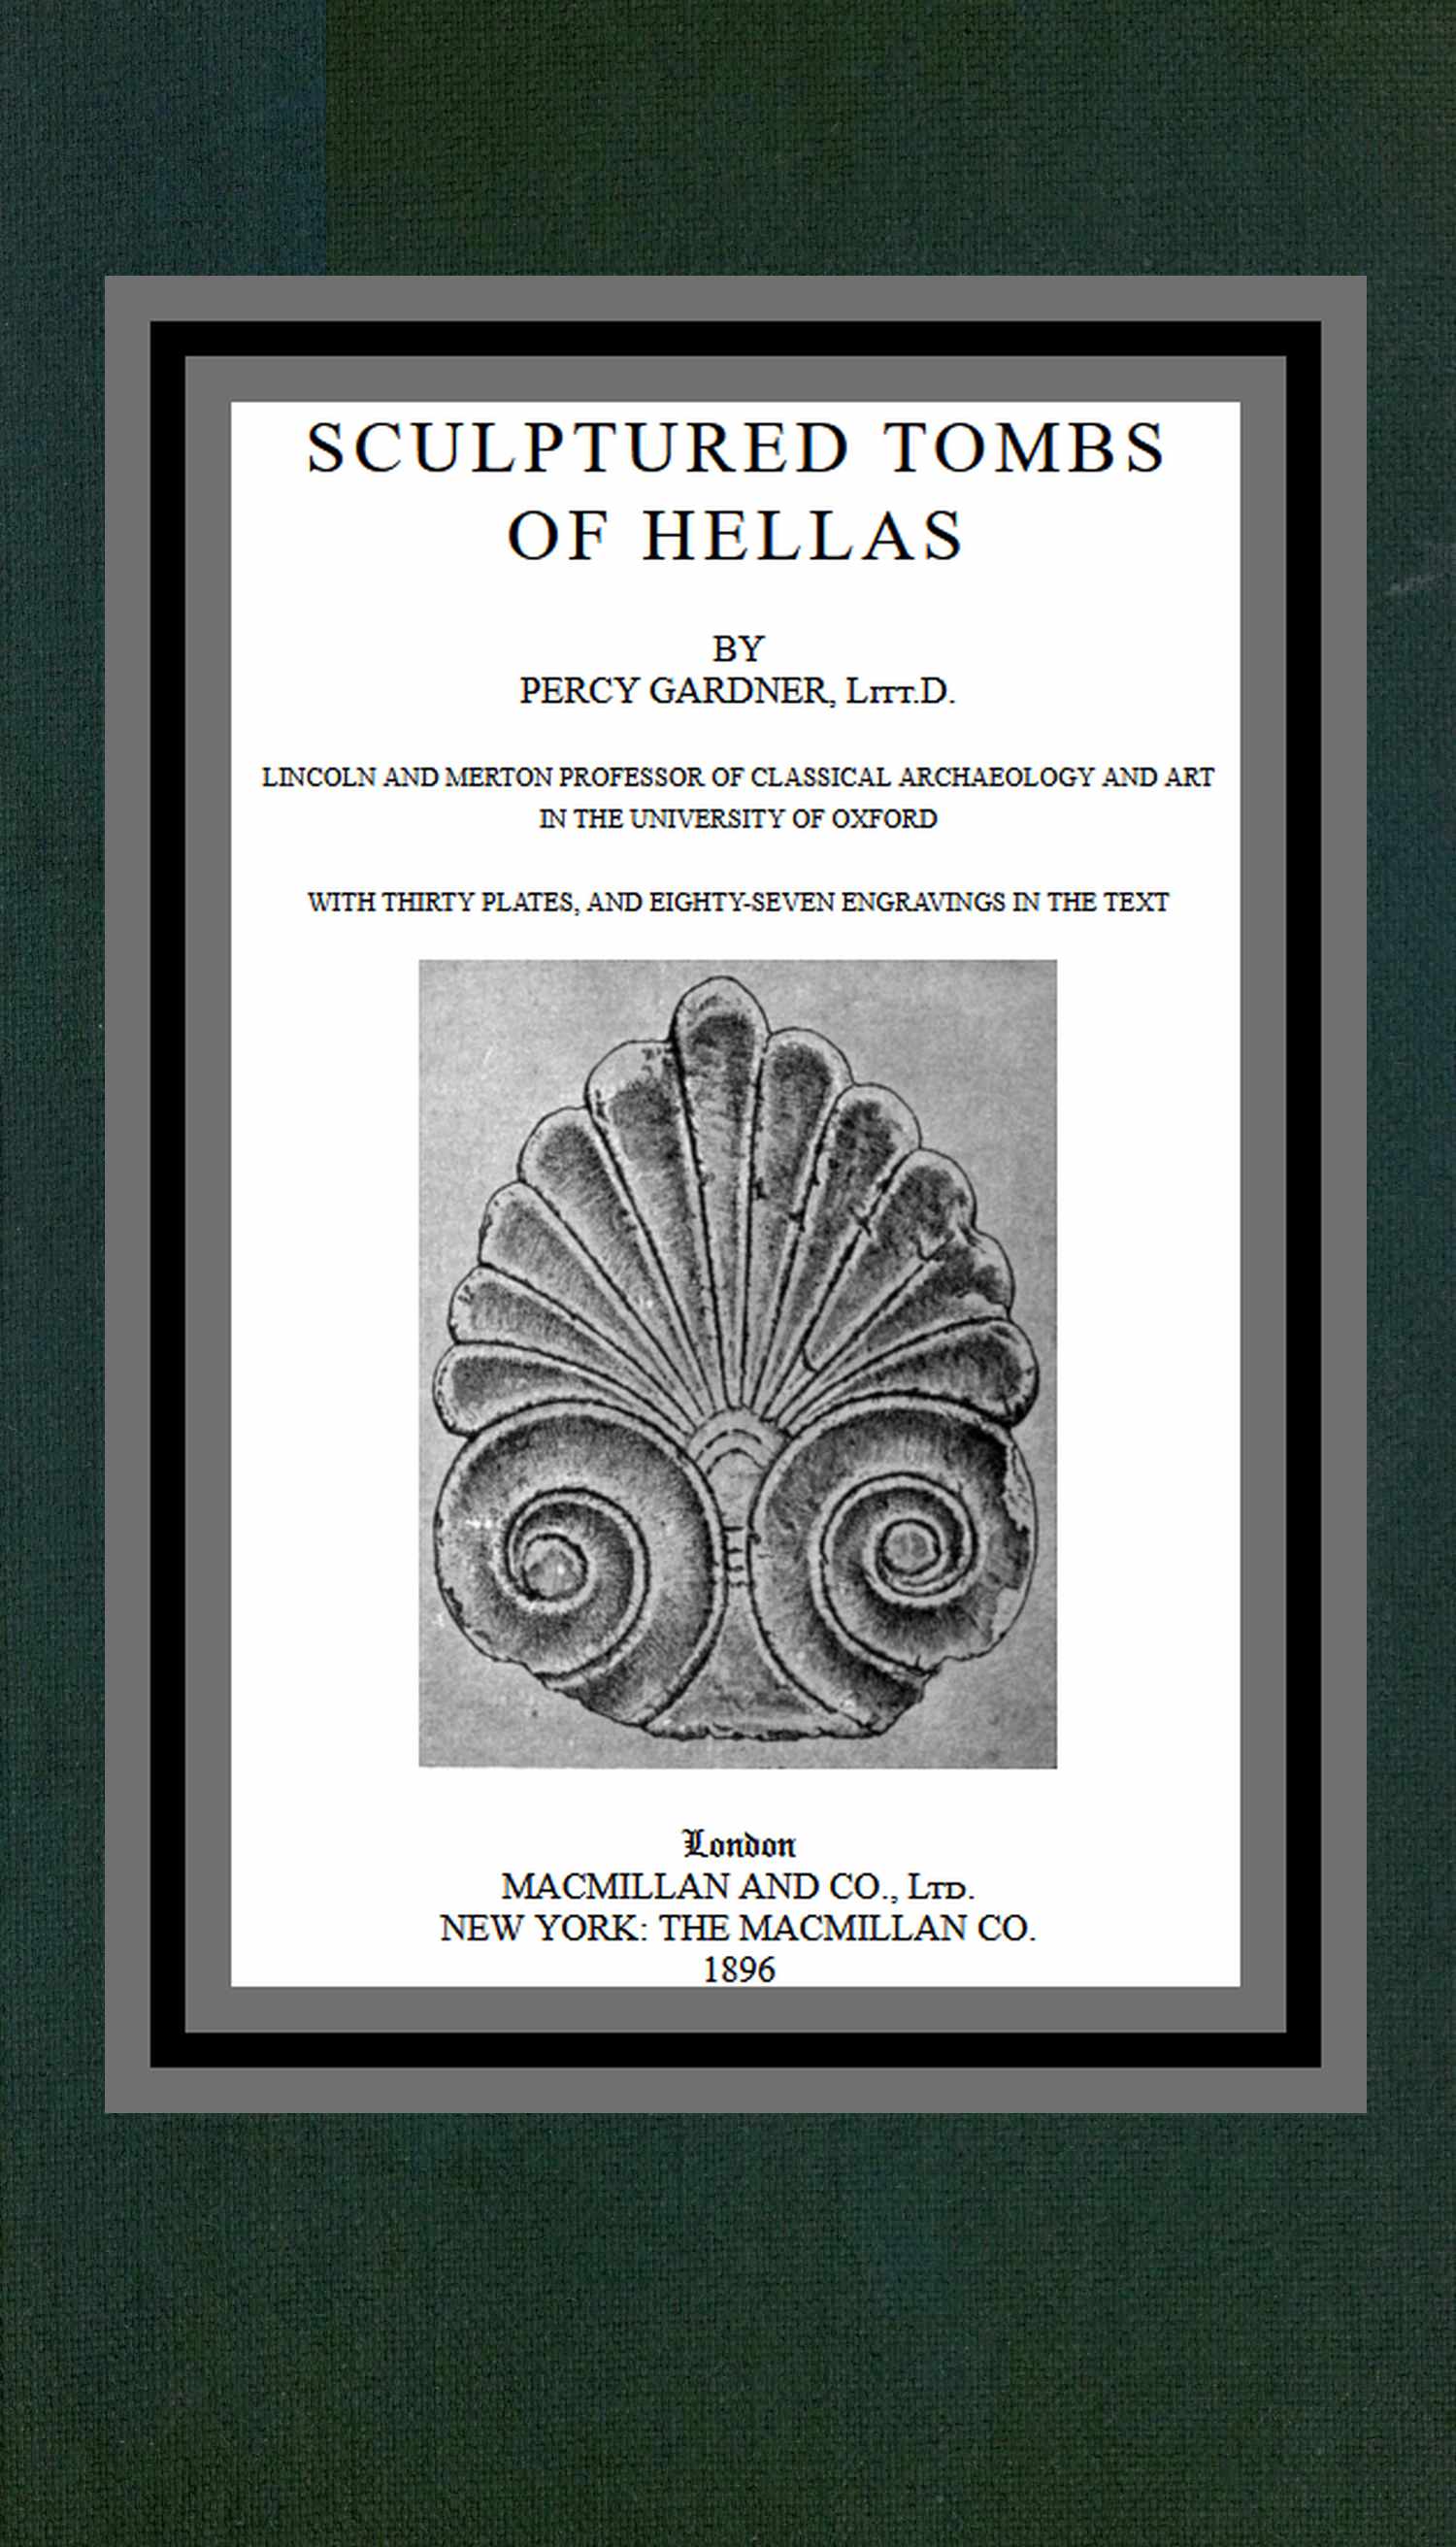 The Project Gutenberg eBook of Sculptured tombs of Hellas, by Percy Gardner. pic picture